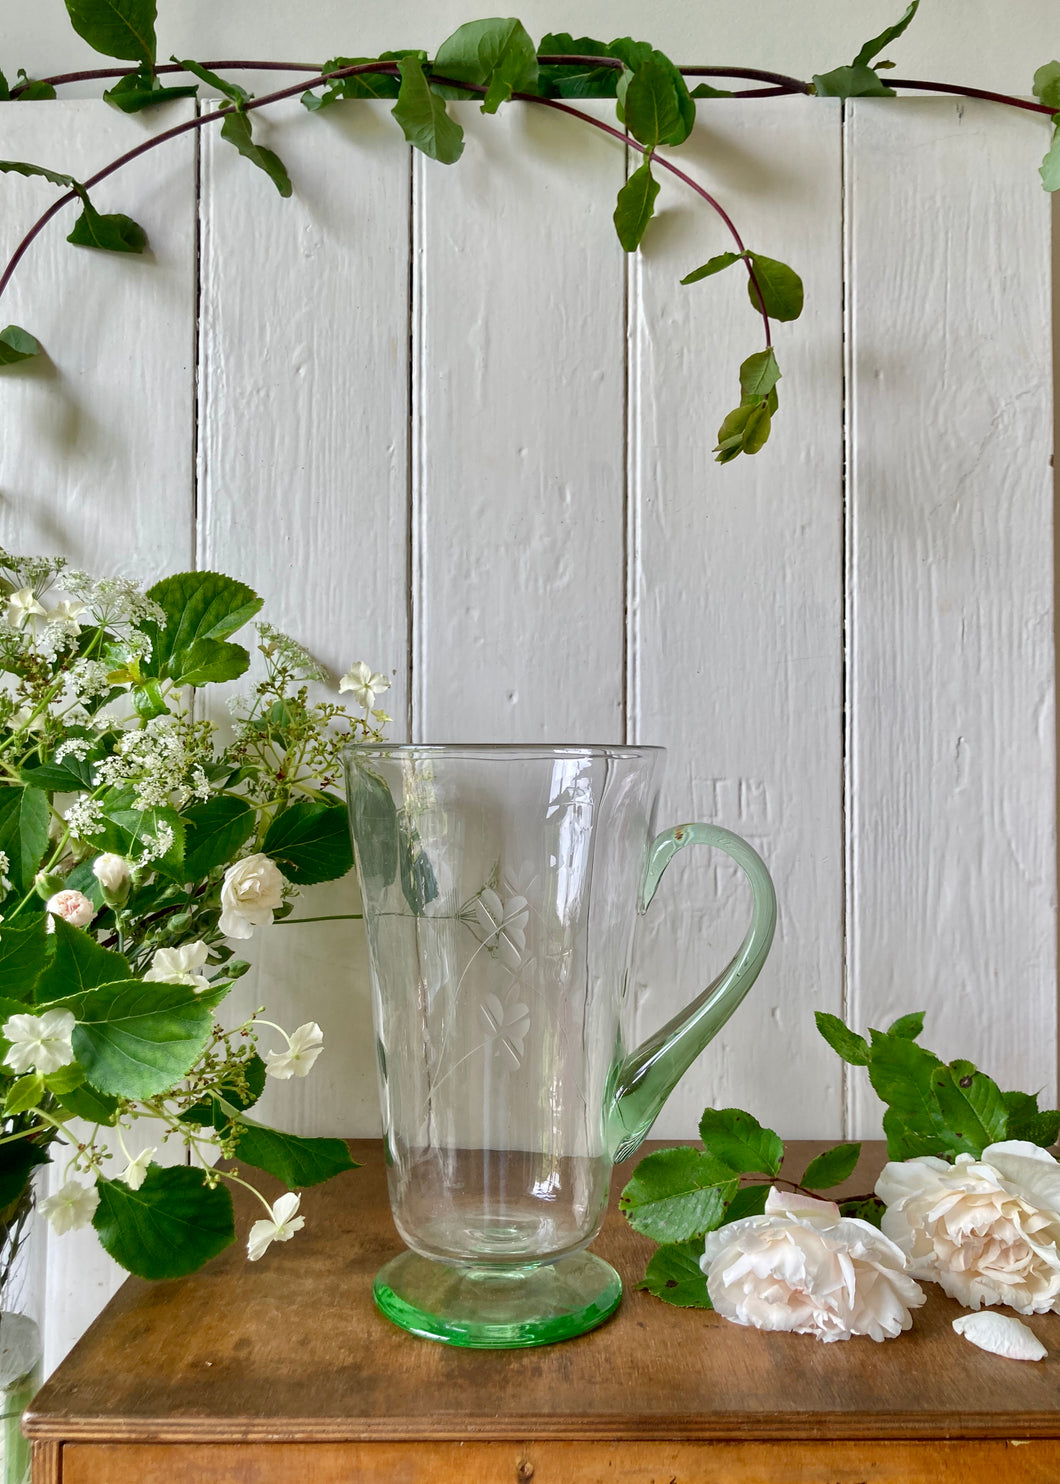 Tall pale green glass jug or pitcher etched with leaves